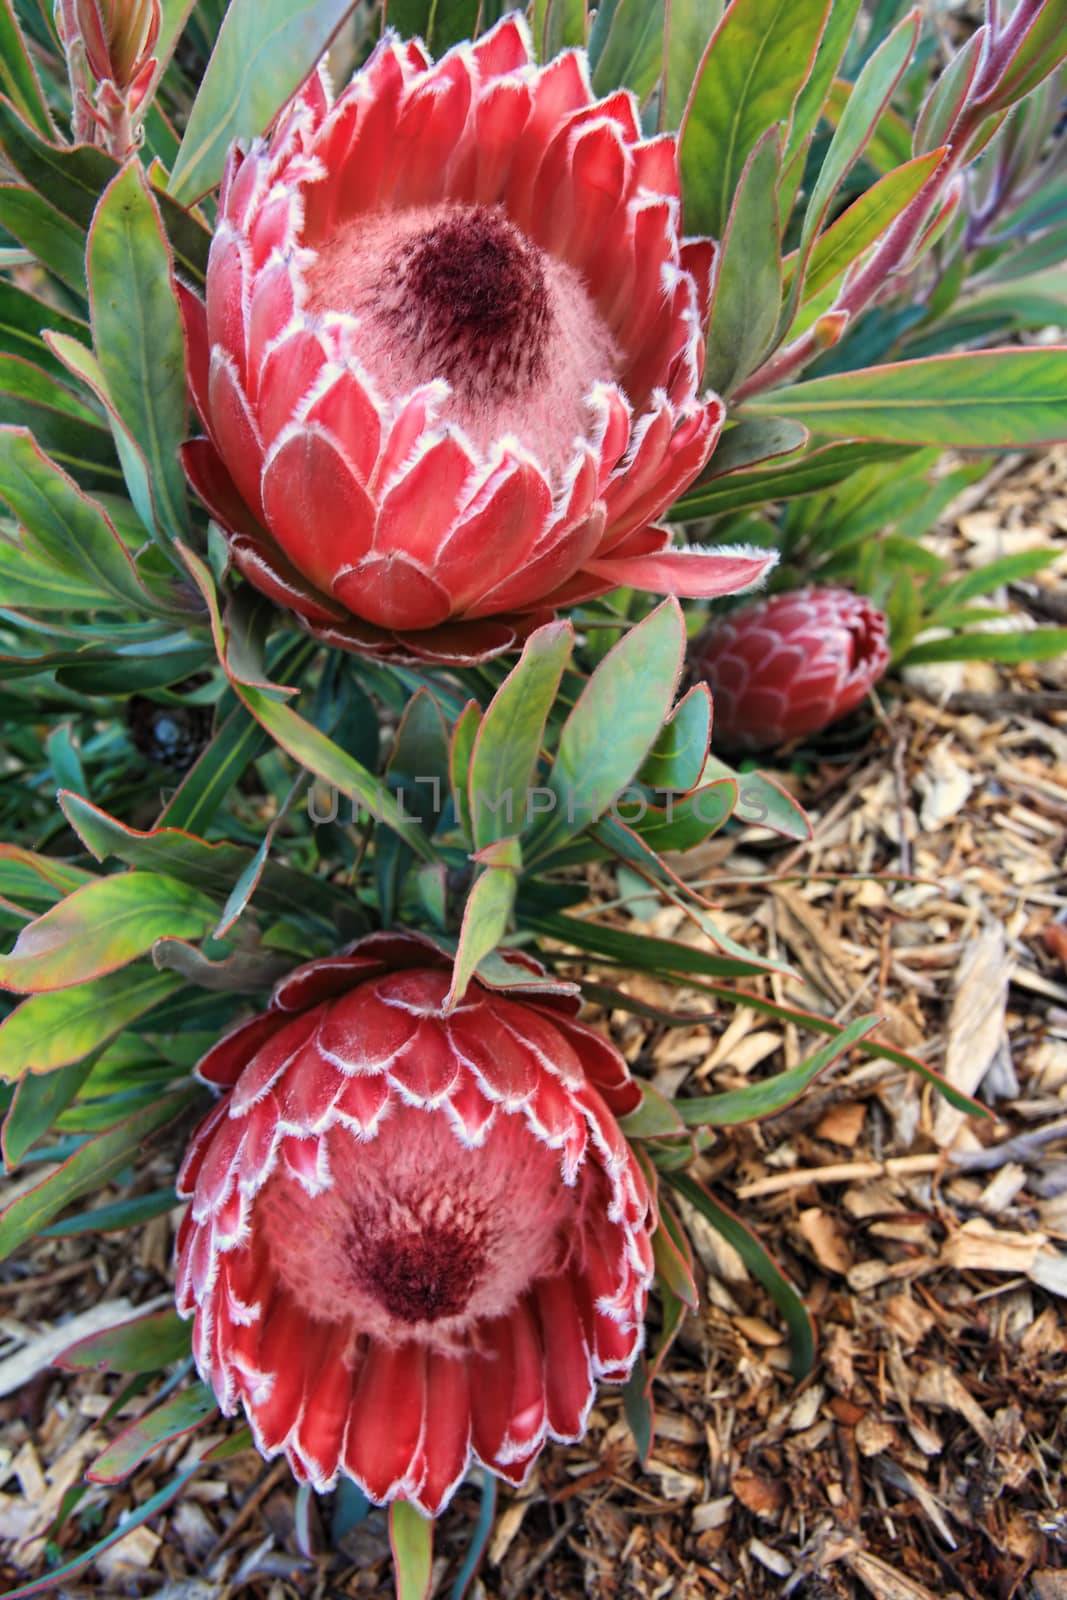 Two protea flowers blooming in the garden. Also known as Sugarbushes.